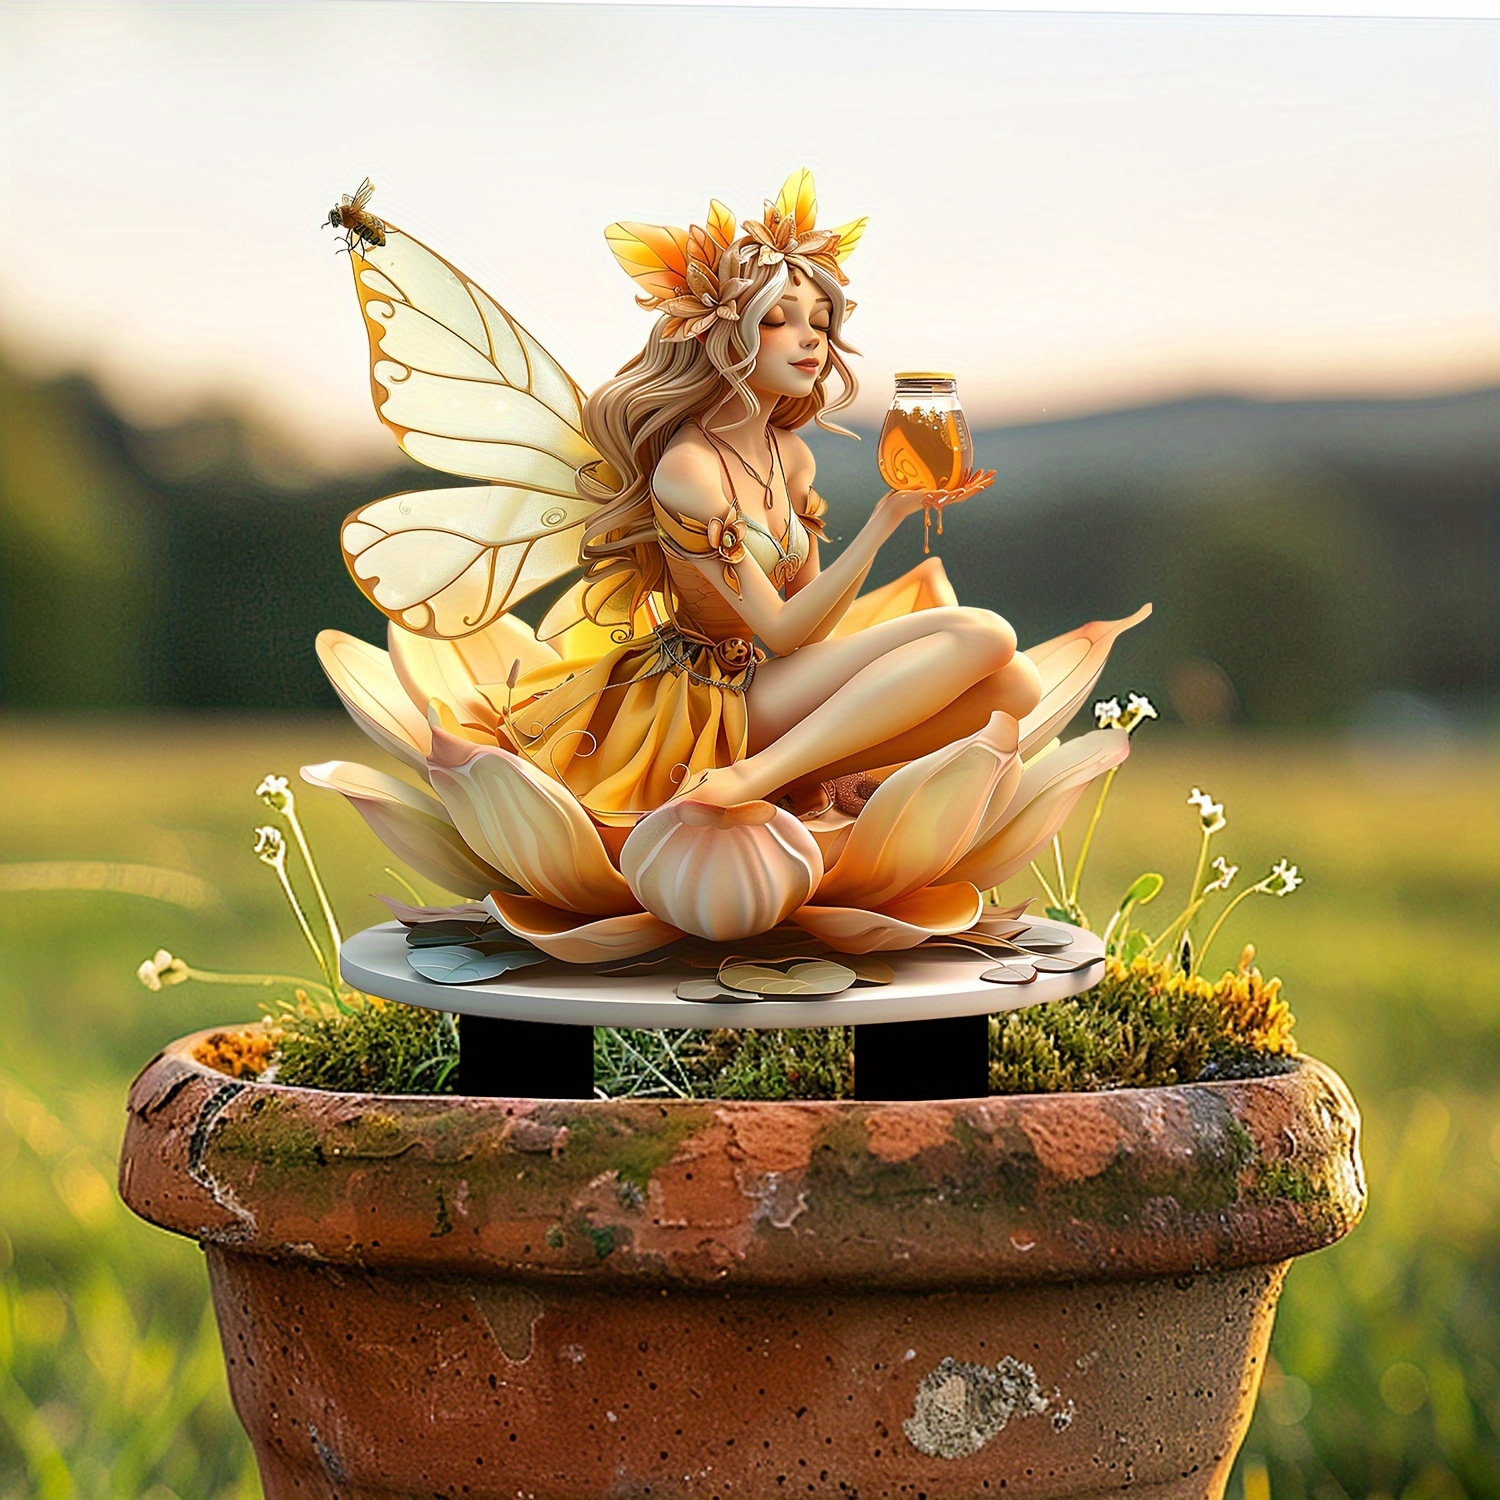 

Boho-chic Flower Fairy With Honey Garden Stake - Acrylic, 11.8"x8.6" - Perfect For Pot Landscaping & Outdoor Decor Flower Decor Flower Decorations For Home